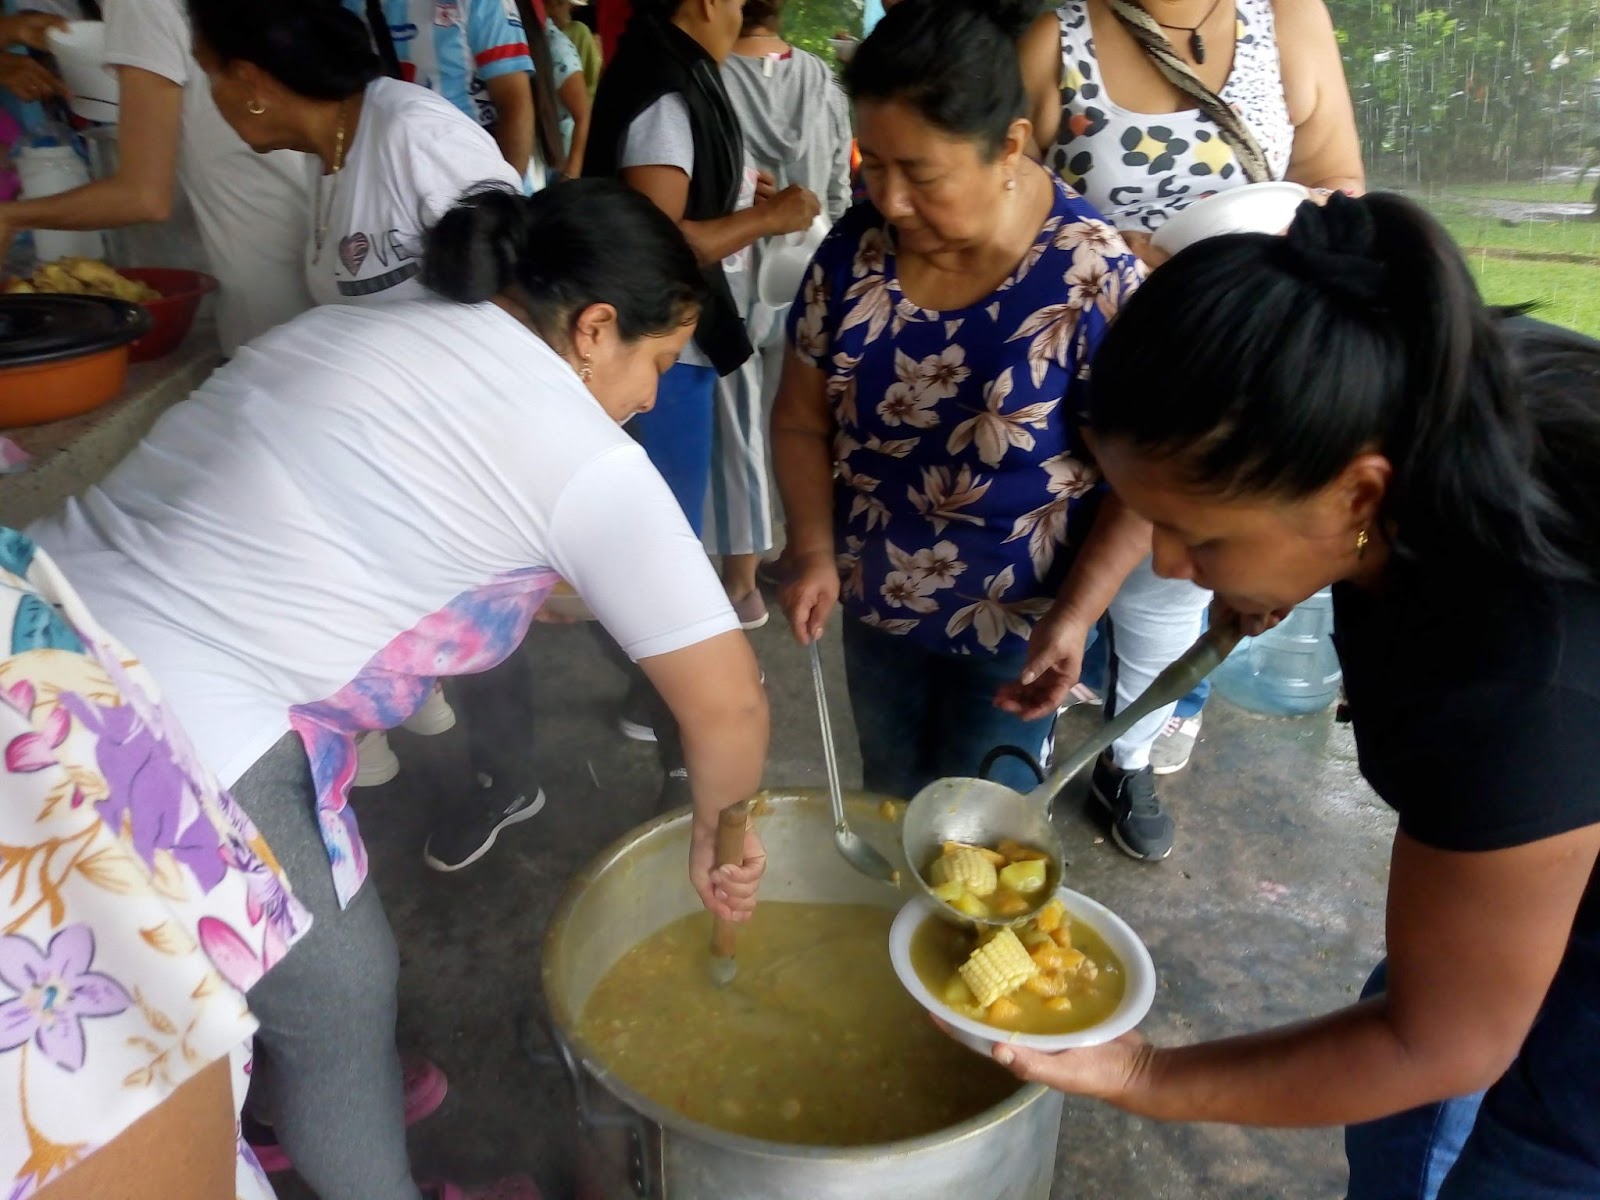 A group of adults scoop food out of a large pot 